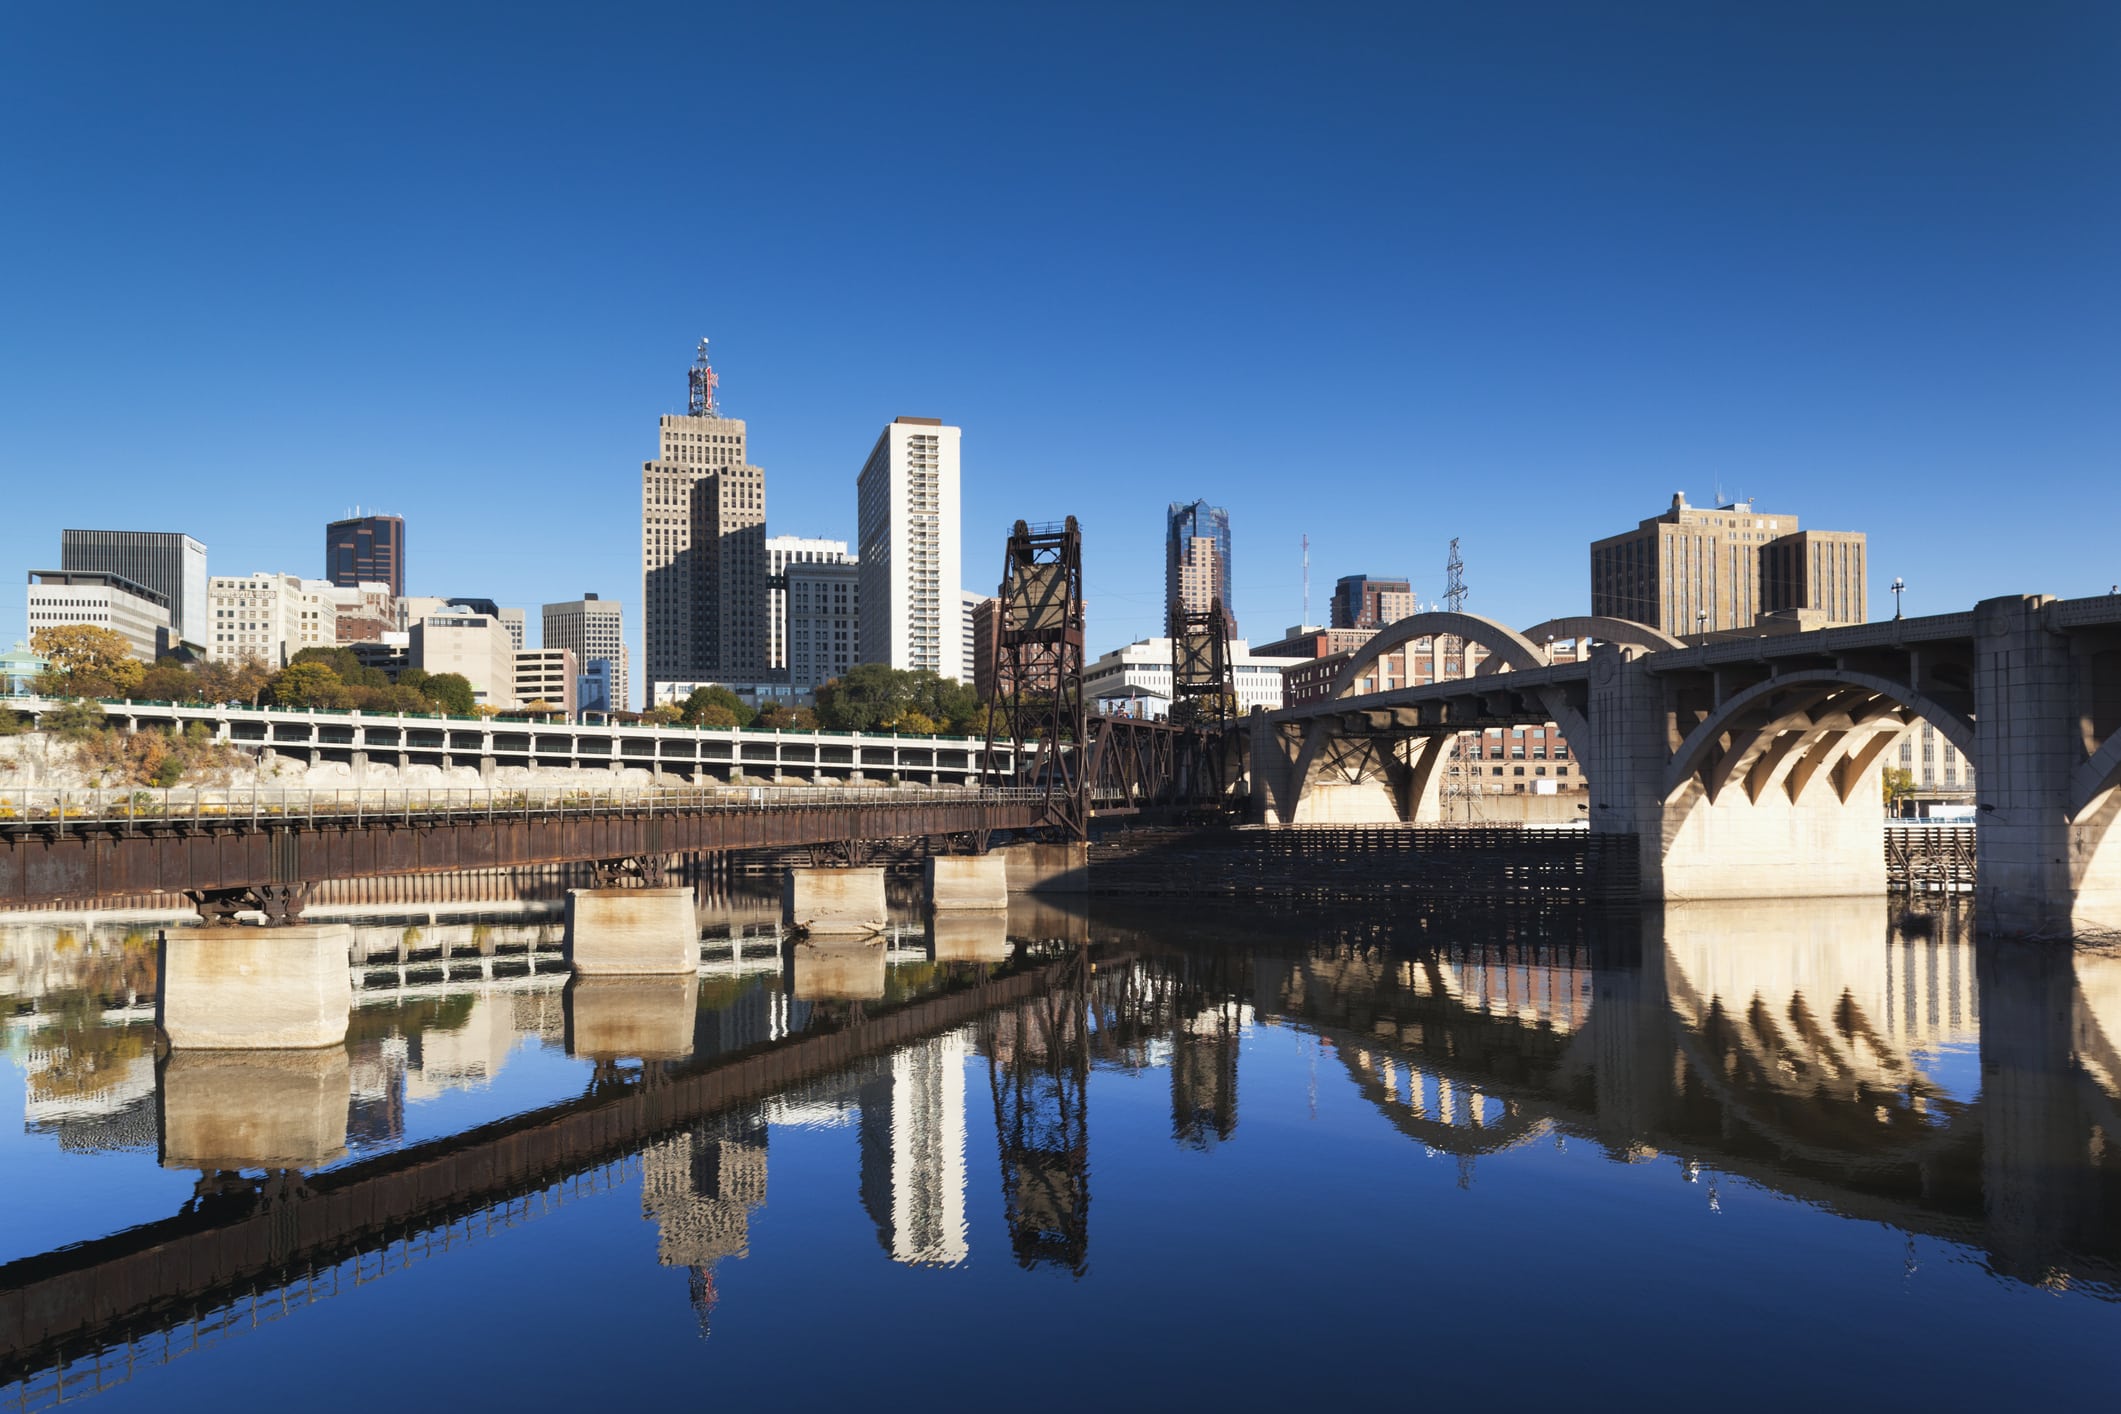 A cityscape featuring a railway bridge and high-rise buildings reflected in the calm water of a river beneath a clear blue sky. The scene showcases a combination of modern and historical architectural styles.